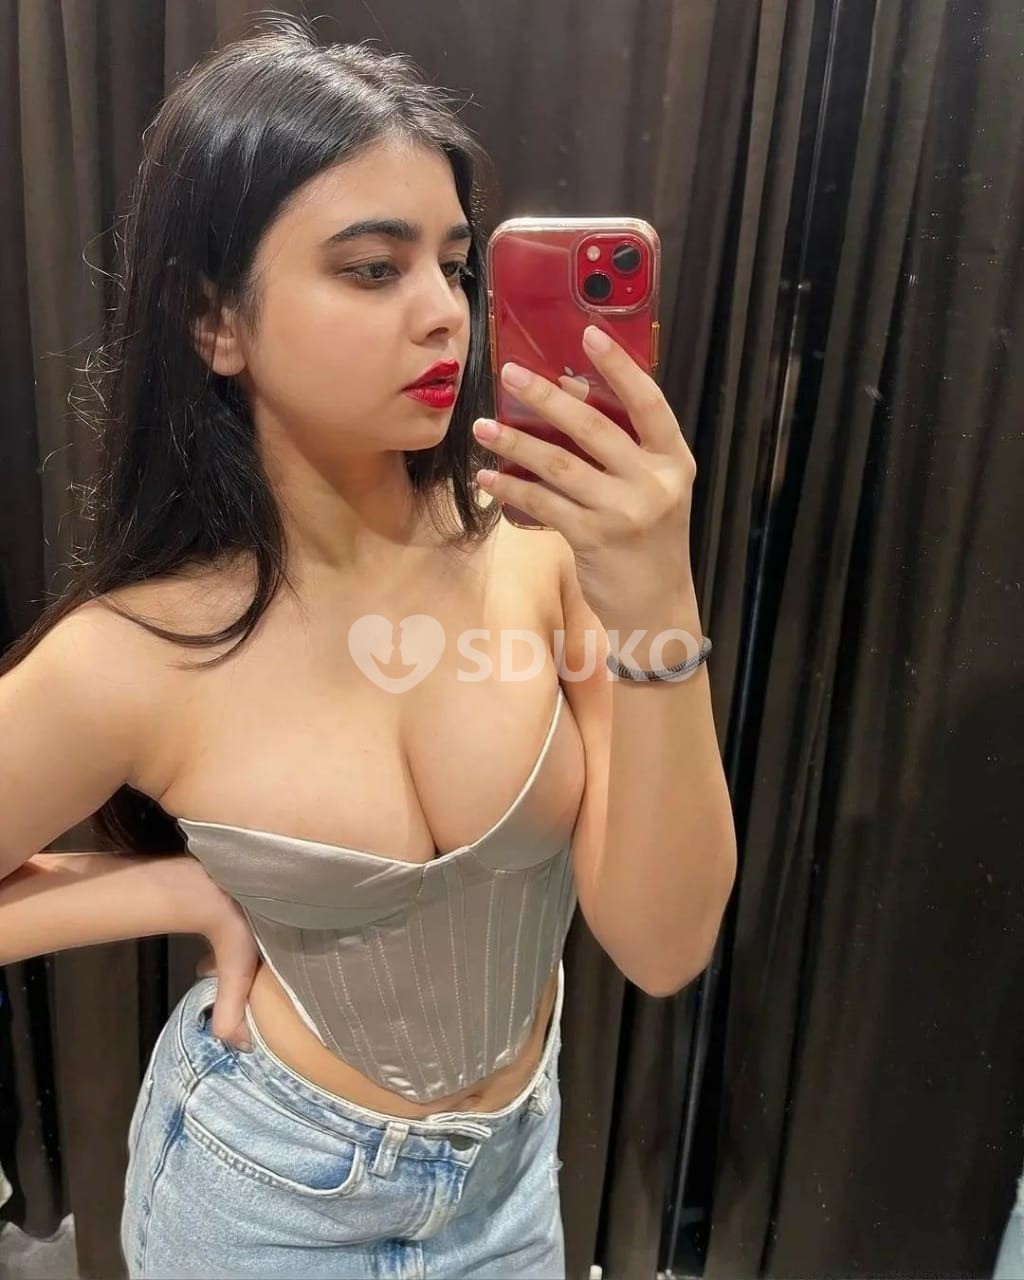 PUNE ALL AREA 😍:VIP TODAY LOW PRICE ESCORT 🥰SERVICE 100% SAFE AND SECURE ANYTIME CALL ME 24 X 7 SERVICE AVAILABLE 